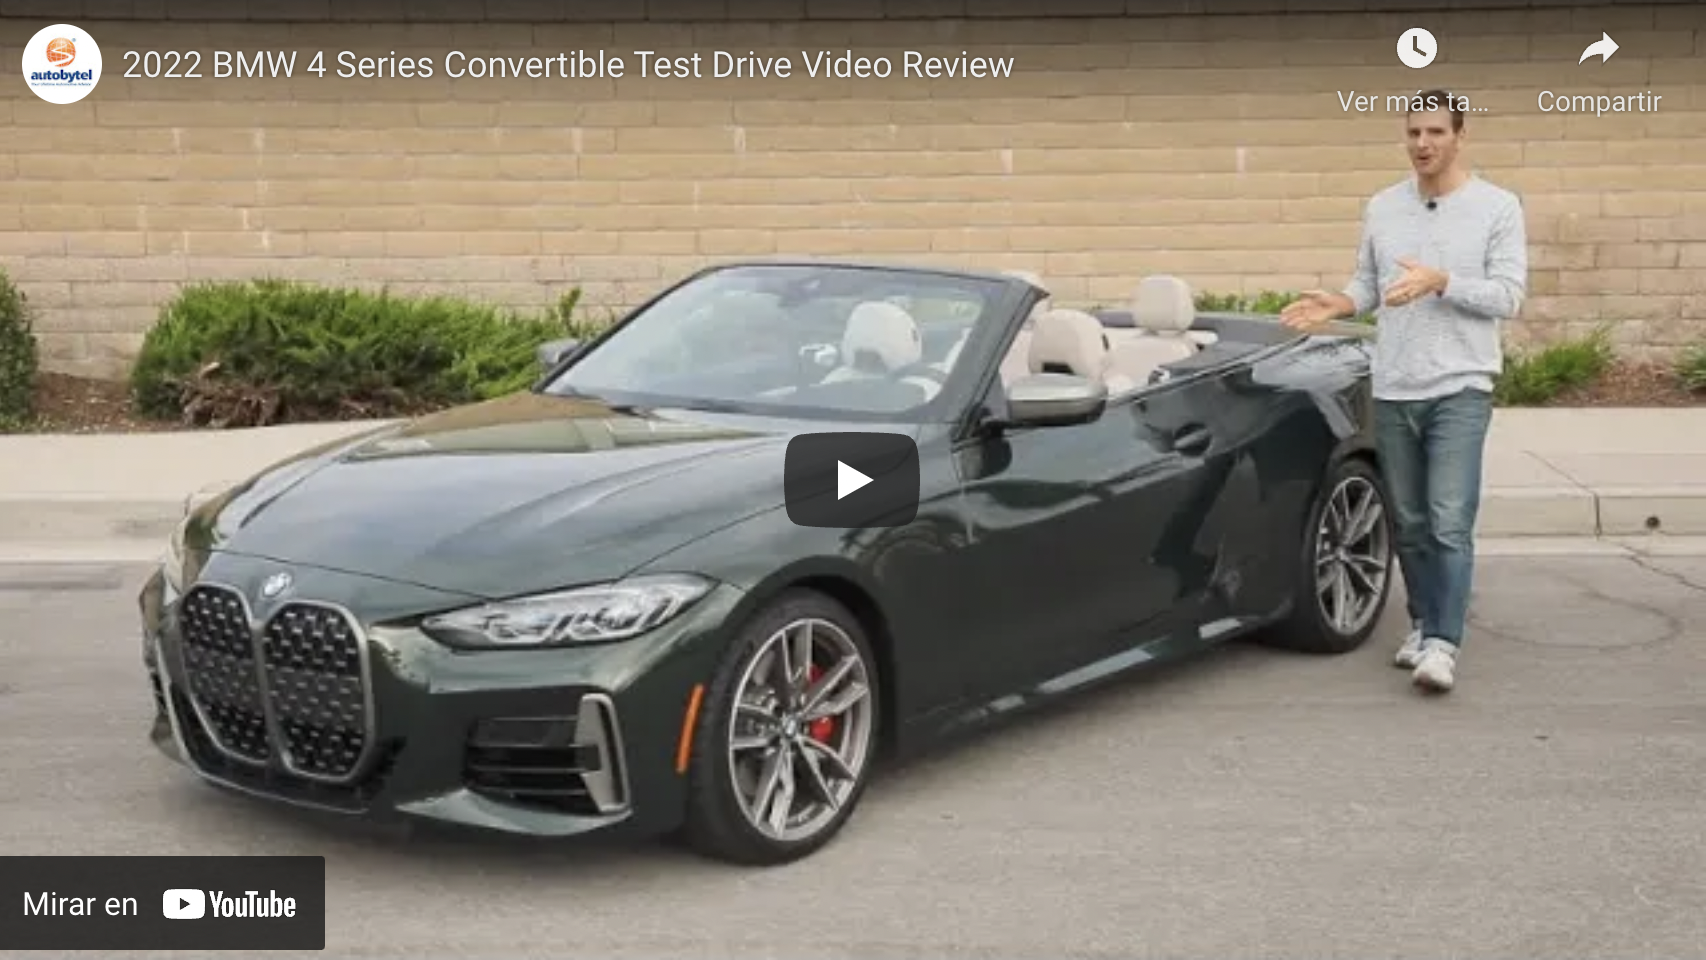 2022 BMW 4 Series Convertible Test Drive Video Review